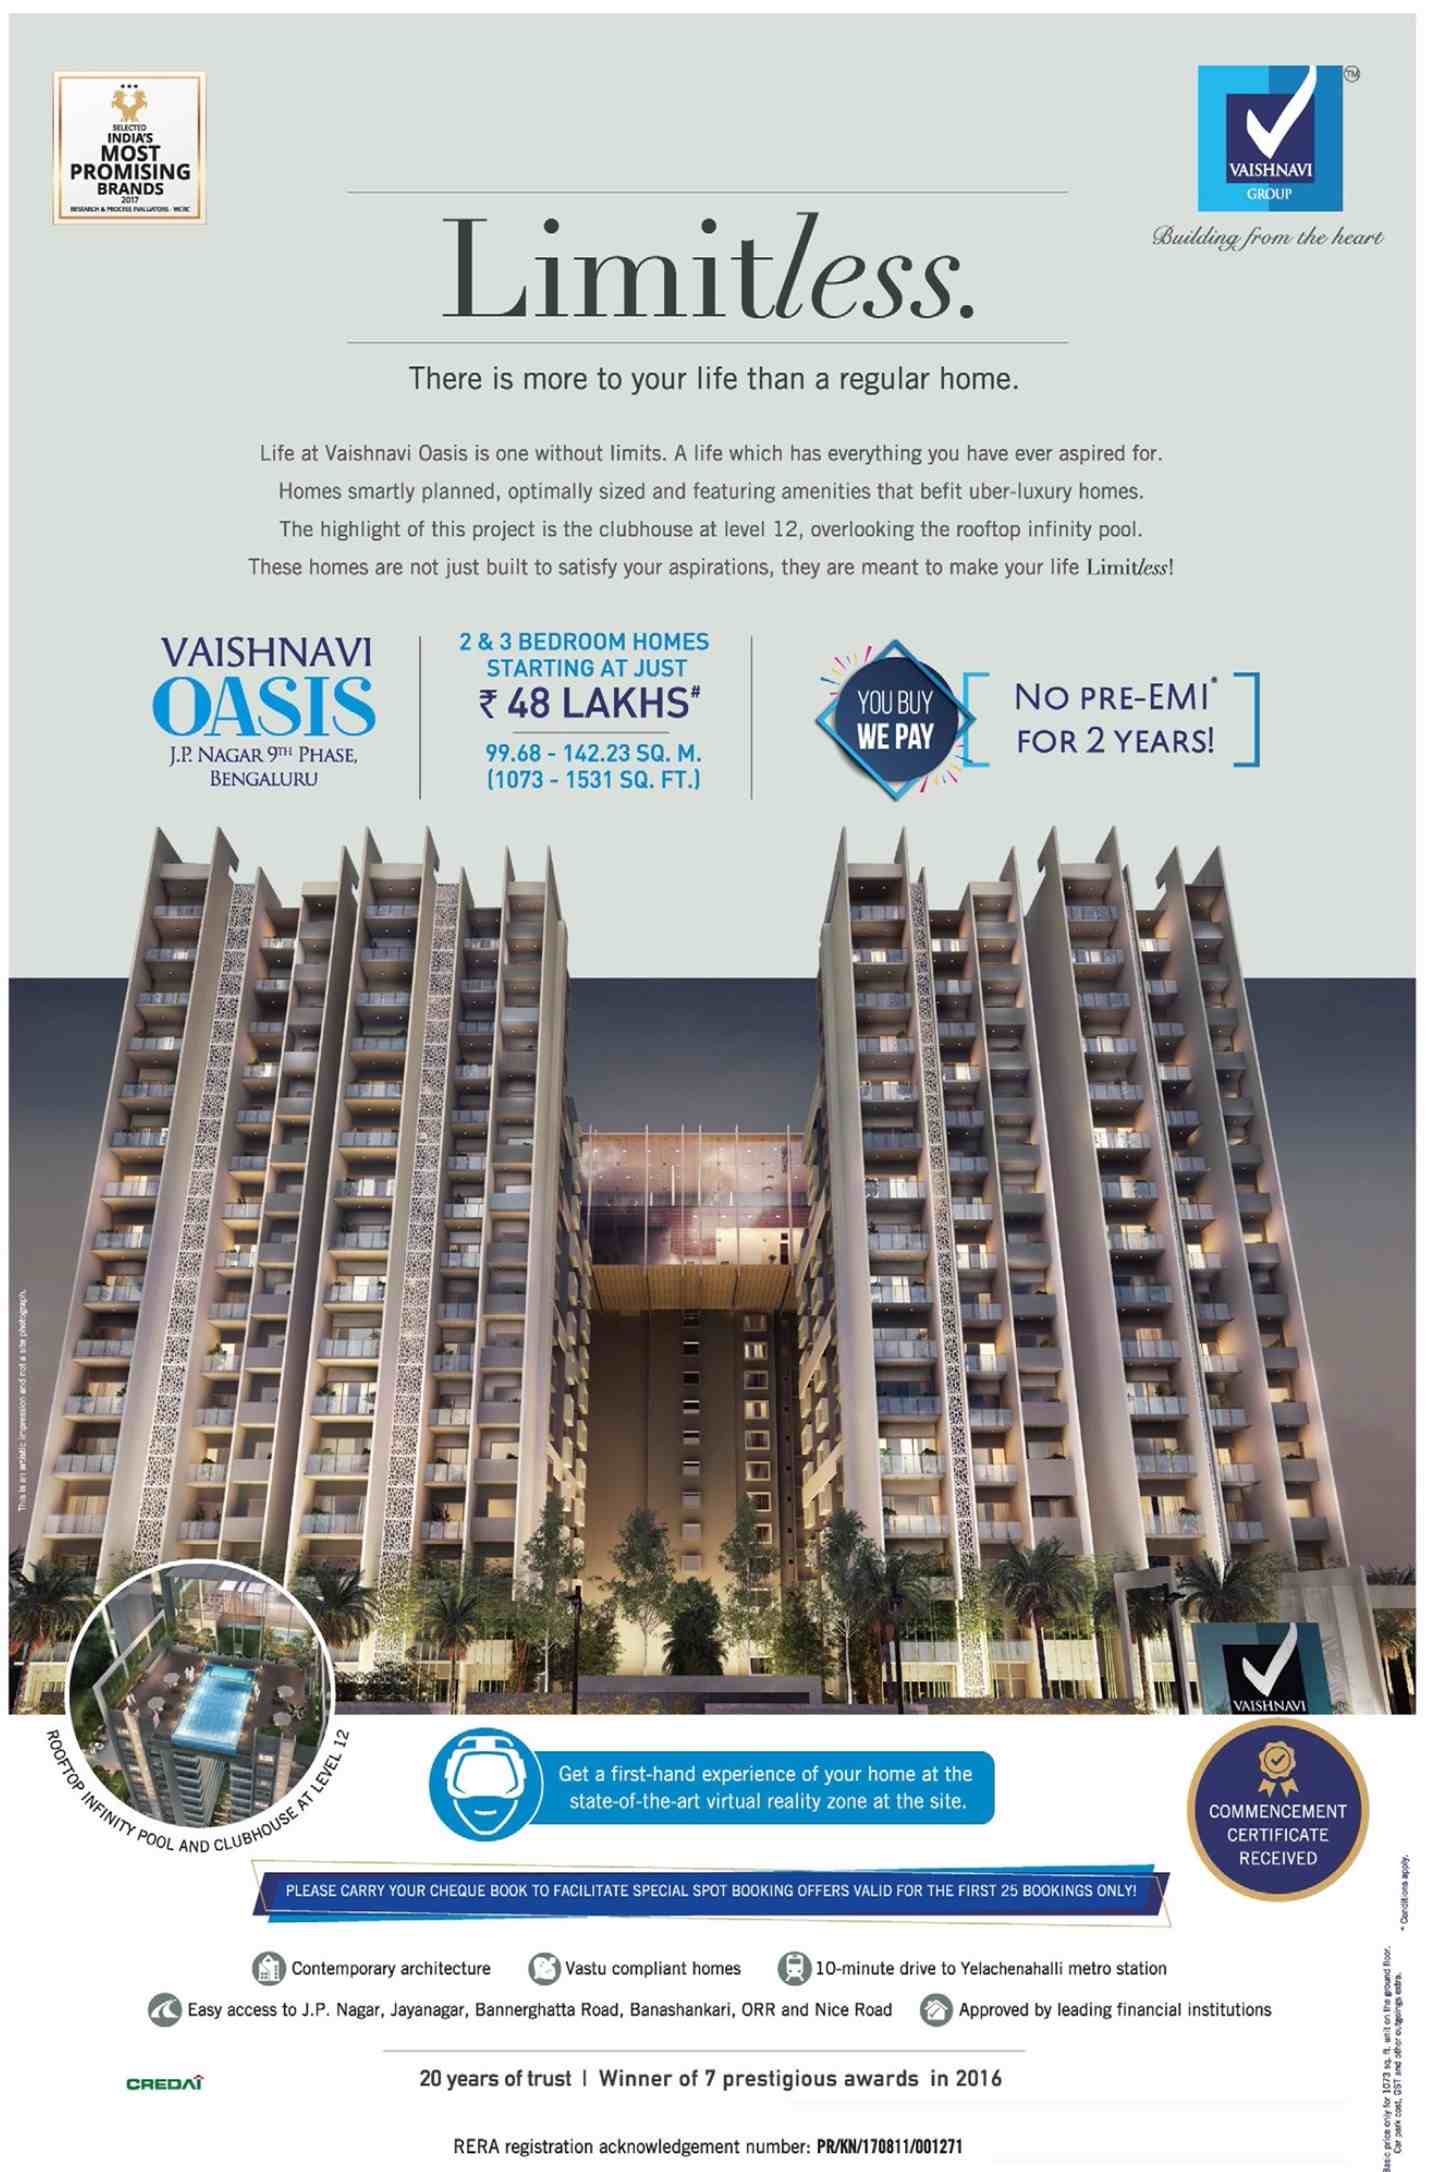 Live a life without limit at Vaishnavi Oasis in Bangalore